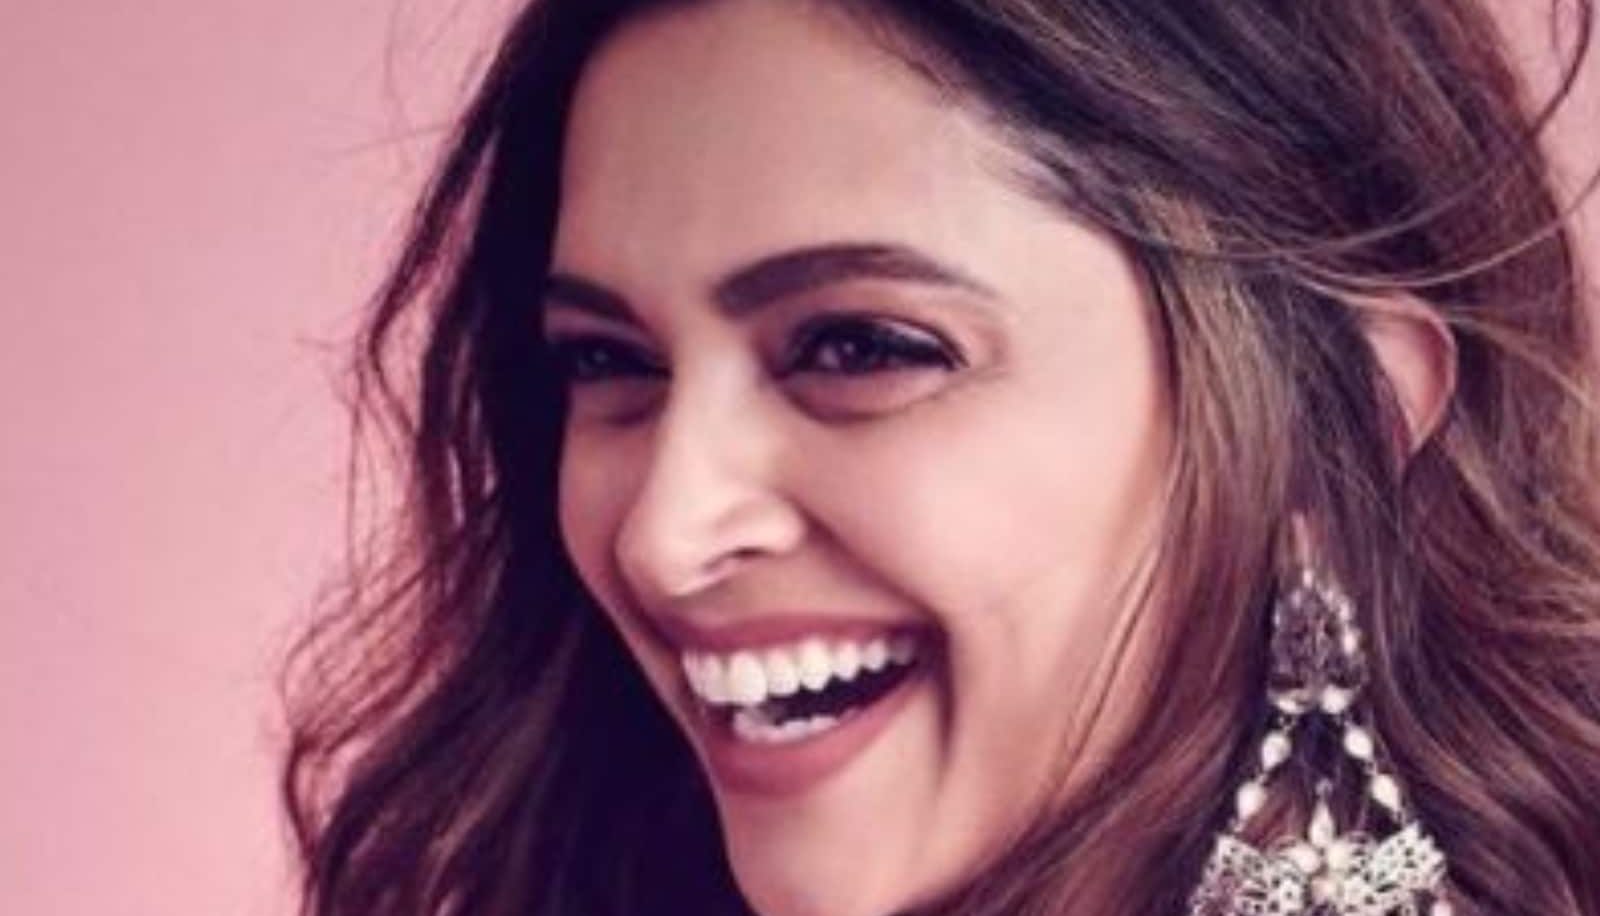 Actresses with infectious smiles!